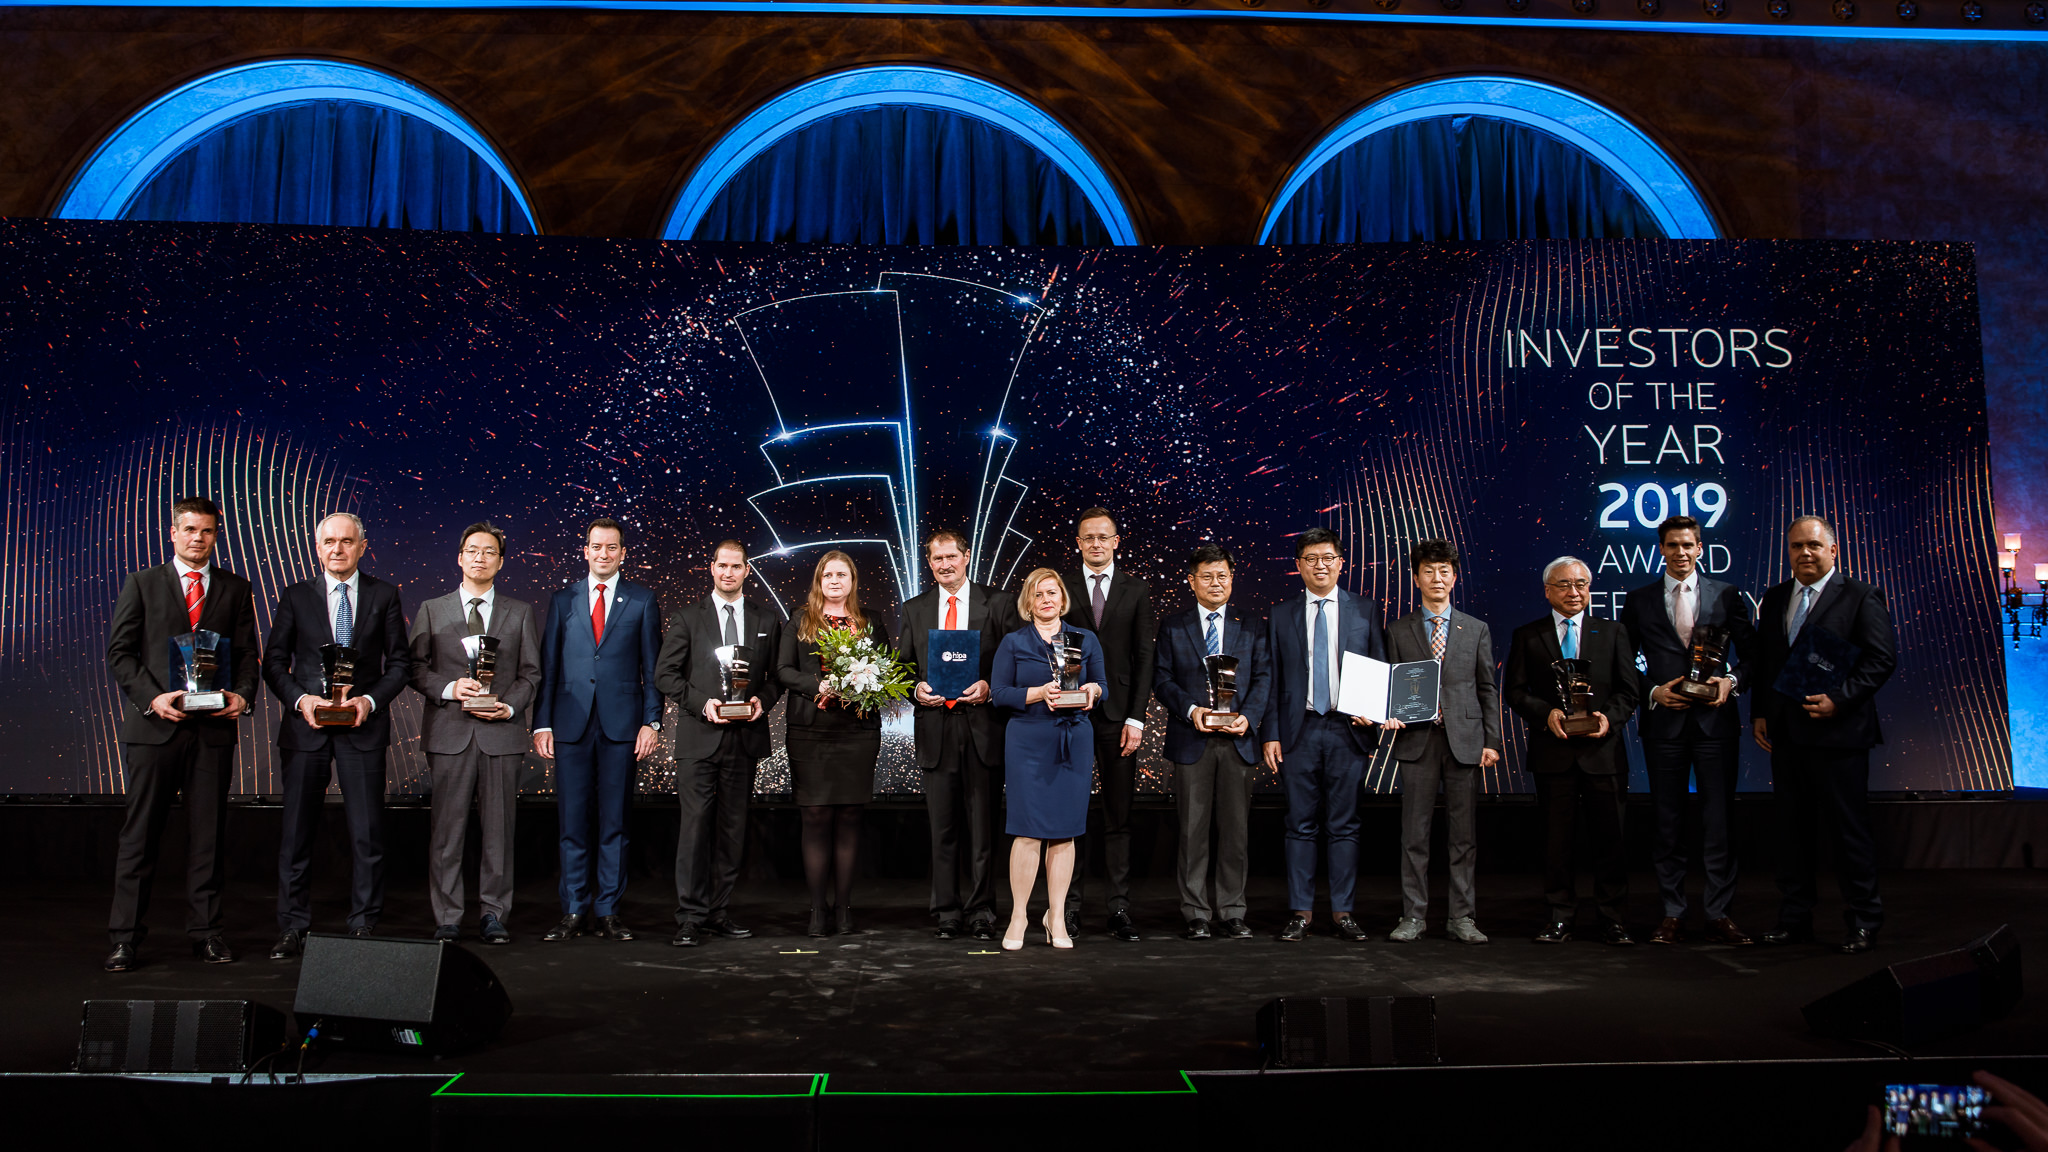 The most prominent investors of 2019 have been honoured in eight categories